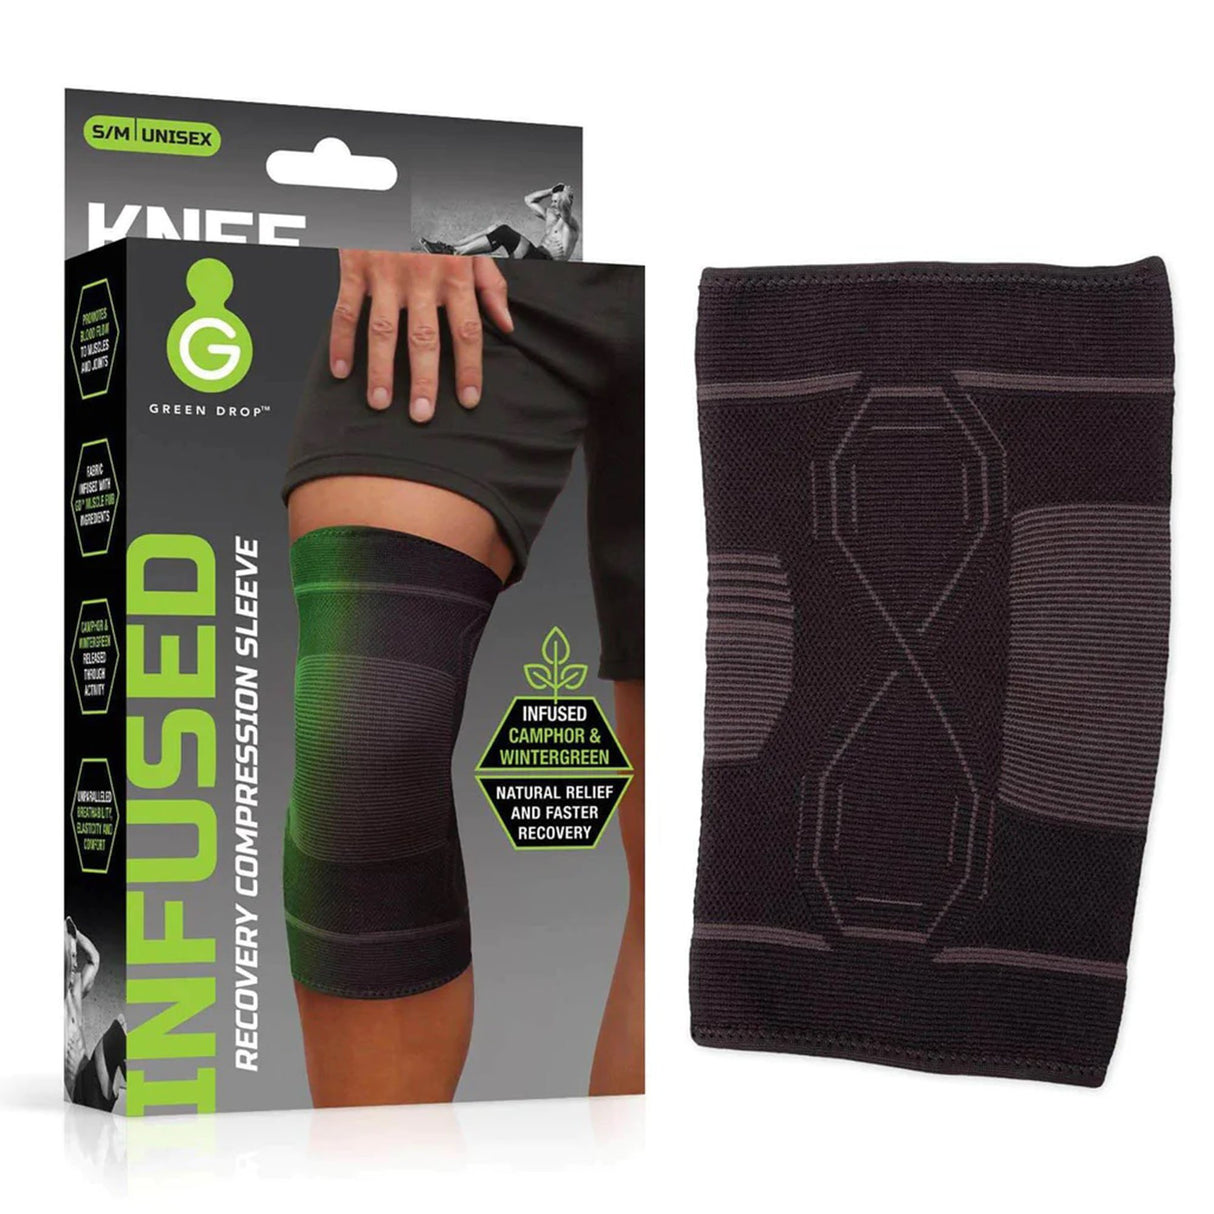 Green Drop Knee Compression Sleeve - Infused Injury Support, S/M